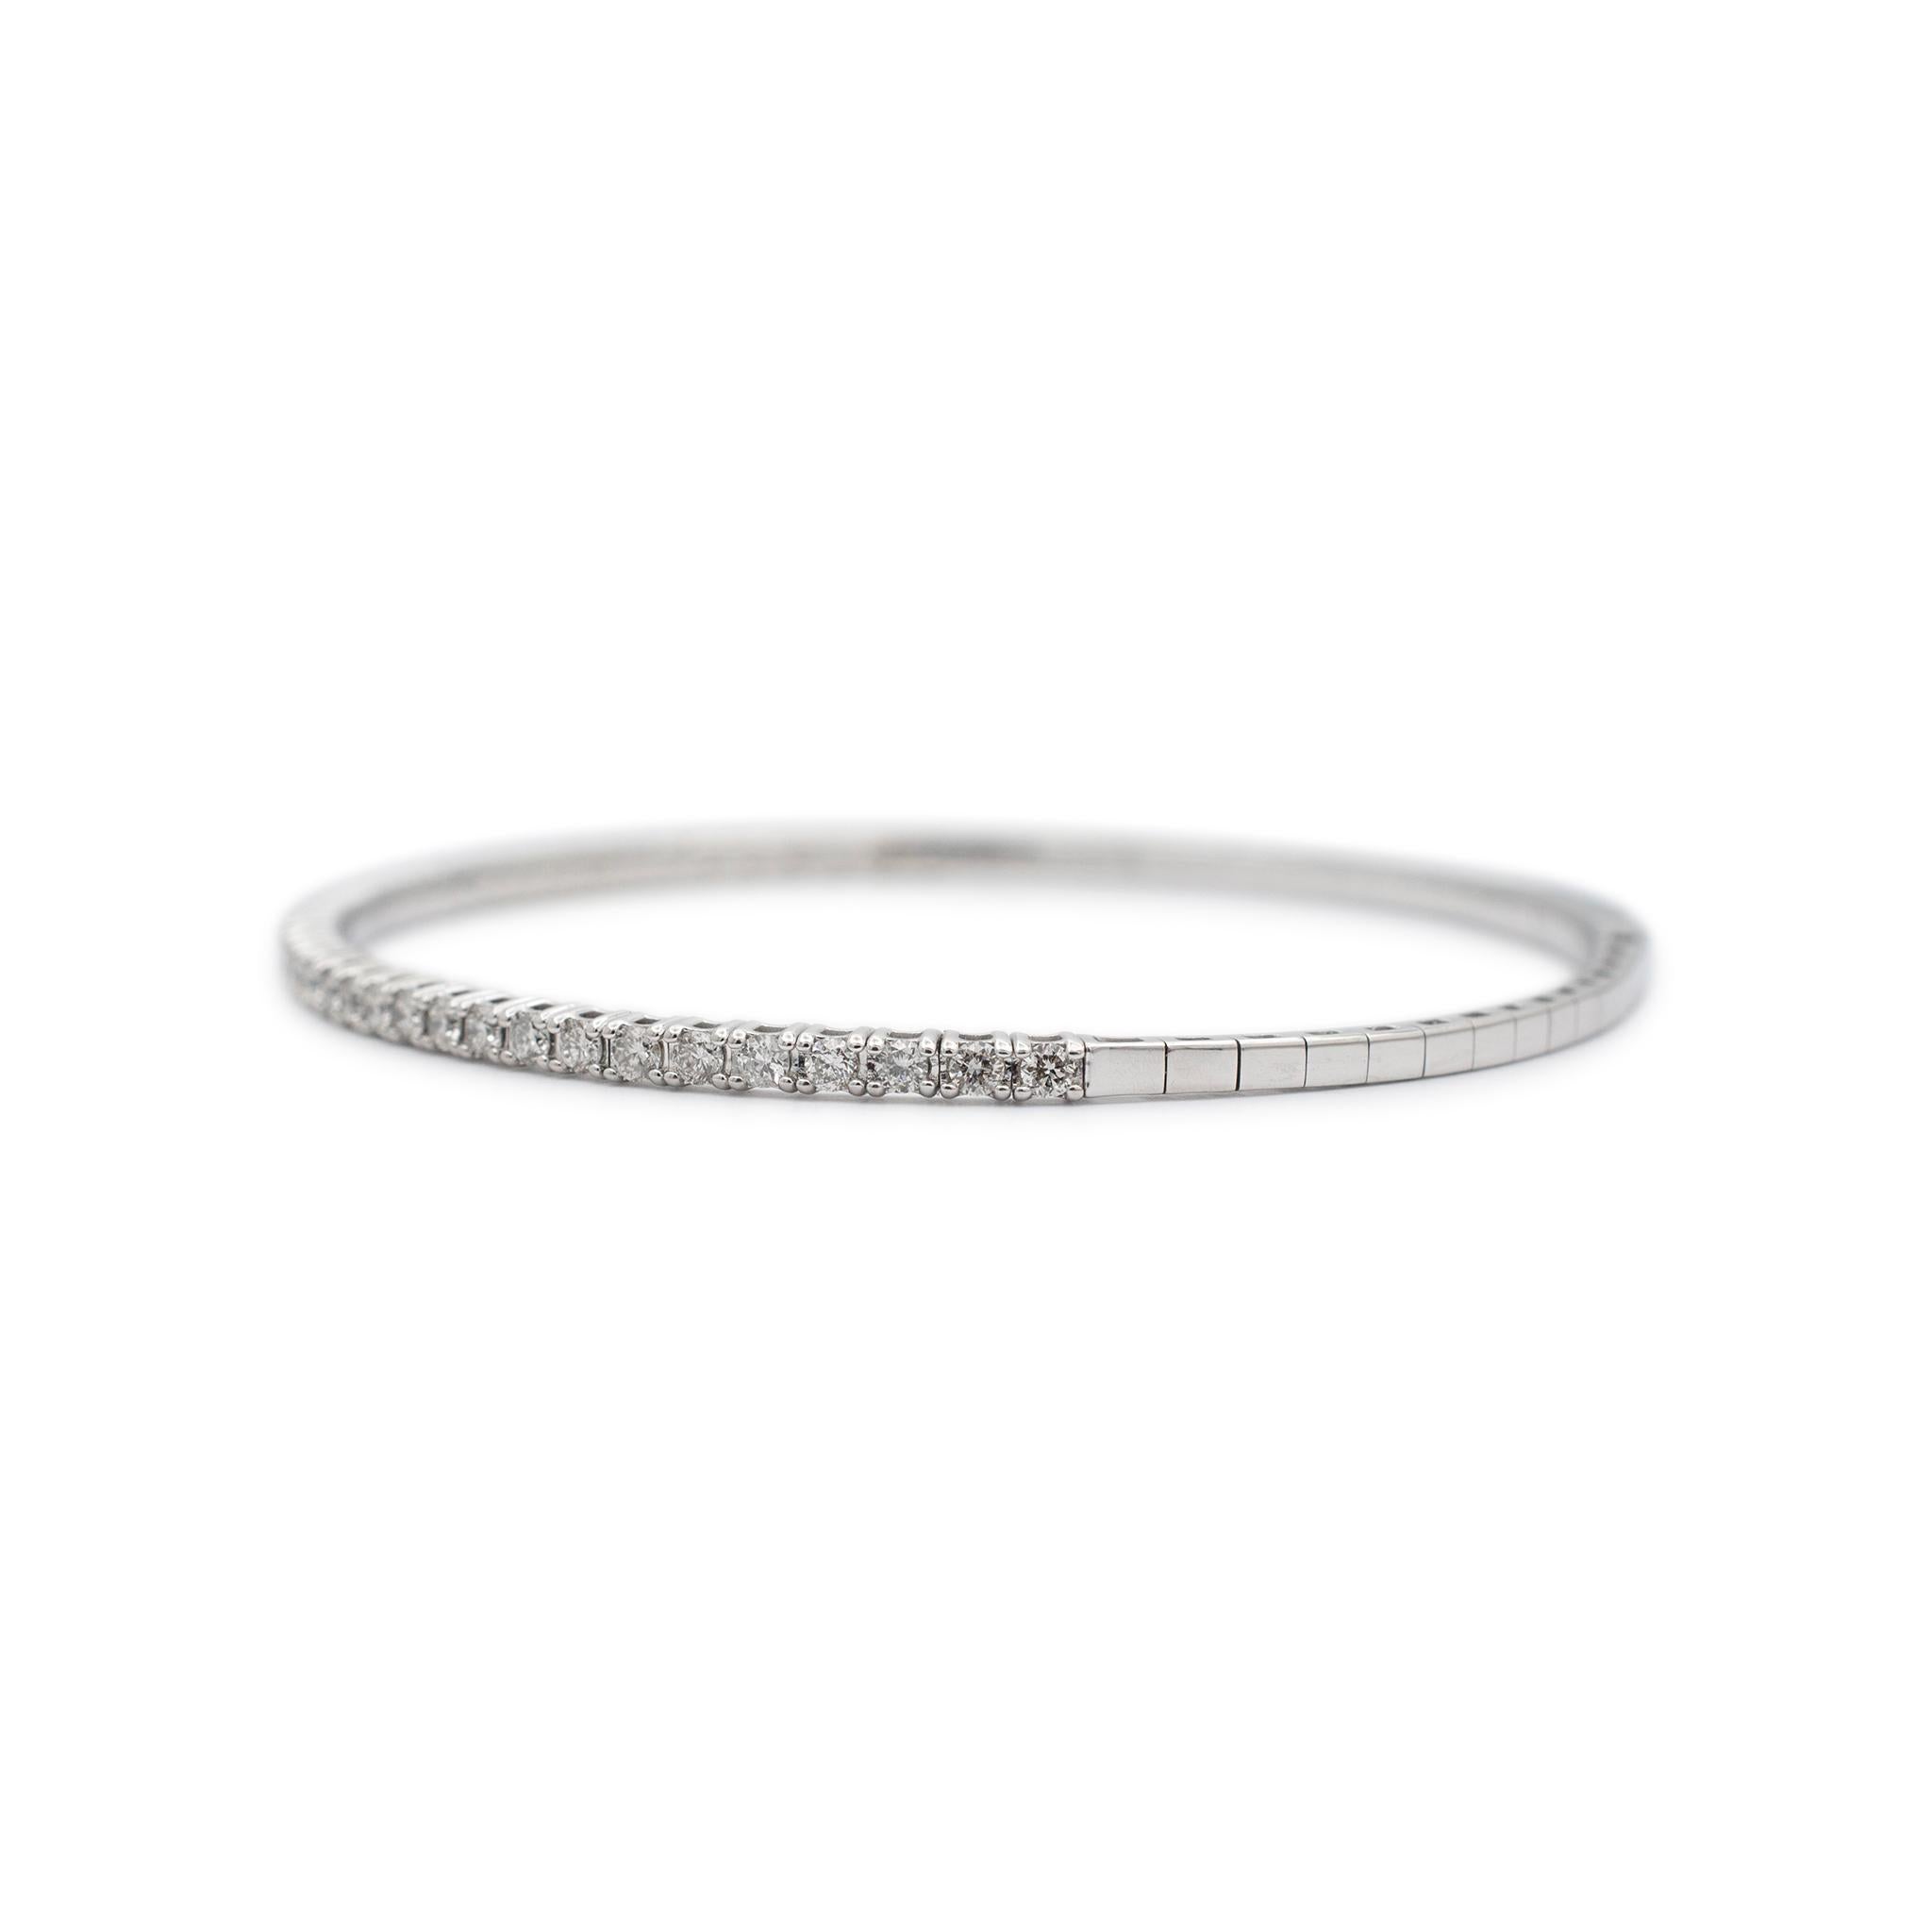 Gender: Ladies

Metal Type: 14K White Gold

Length: 6.25 inches

Width: 1.85 mm

Weight: 5.63 grams

Ladies 14K White Gold diamond tennis bracelet. The metal was tested and determined to be 14K white gold. Engraved with 